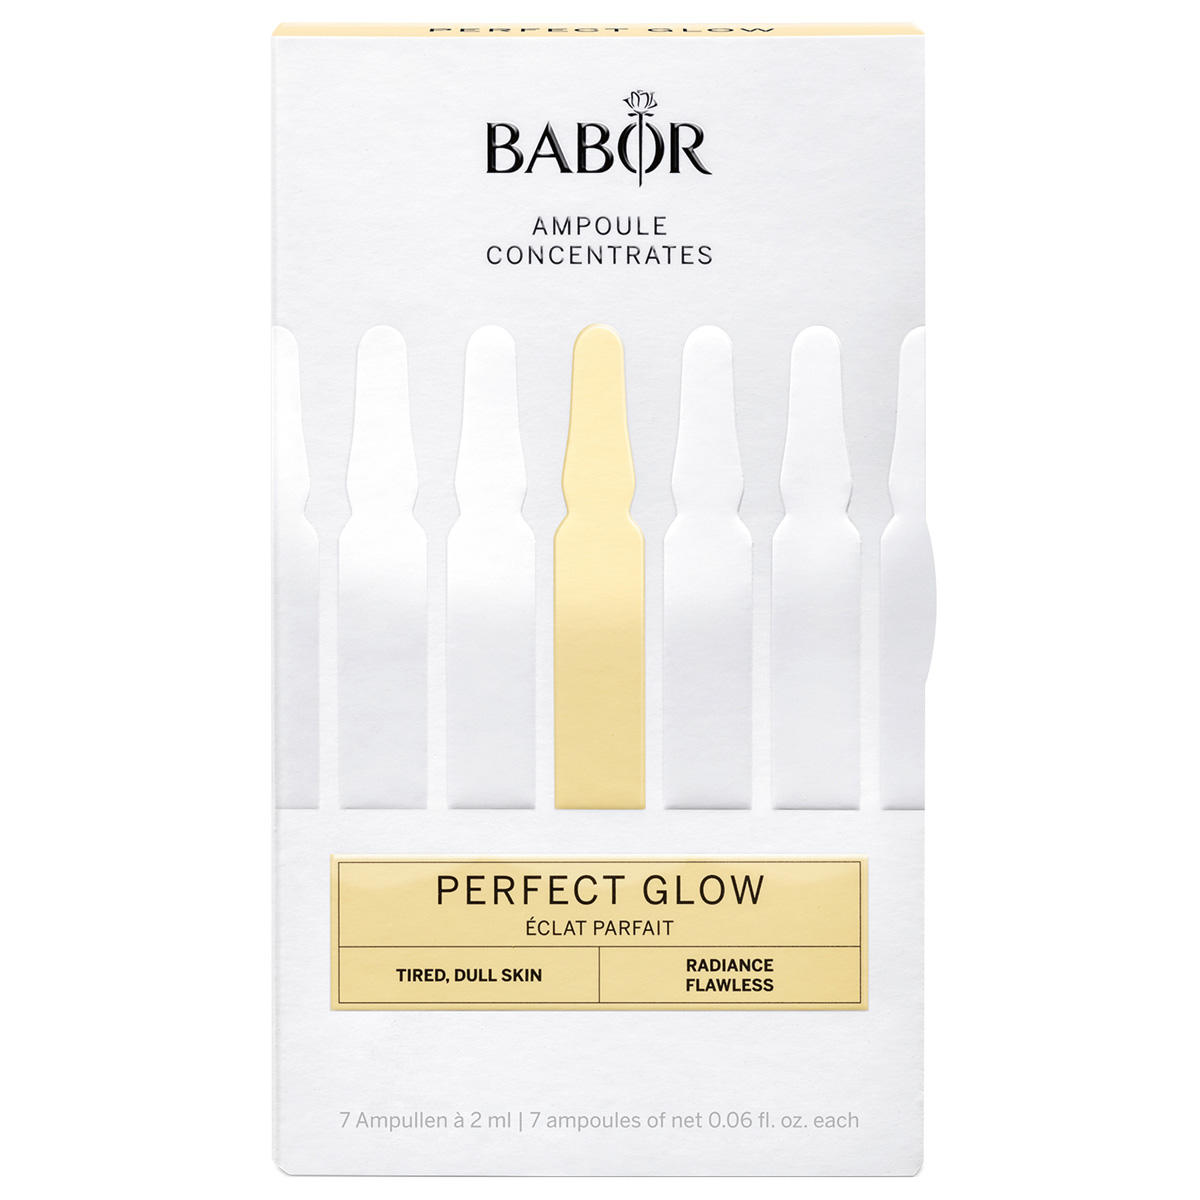 BABOR AMPOULE CONCENTRATES Perfect Glow 7 x 2 ml - 1